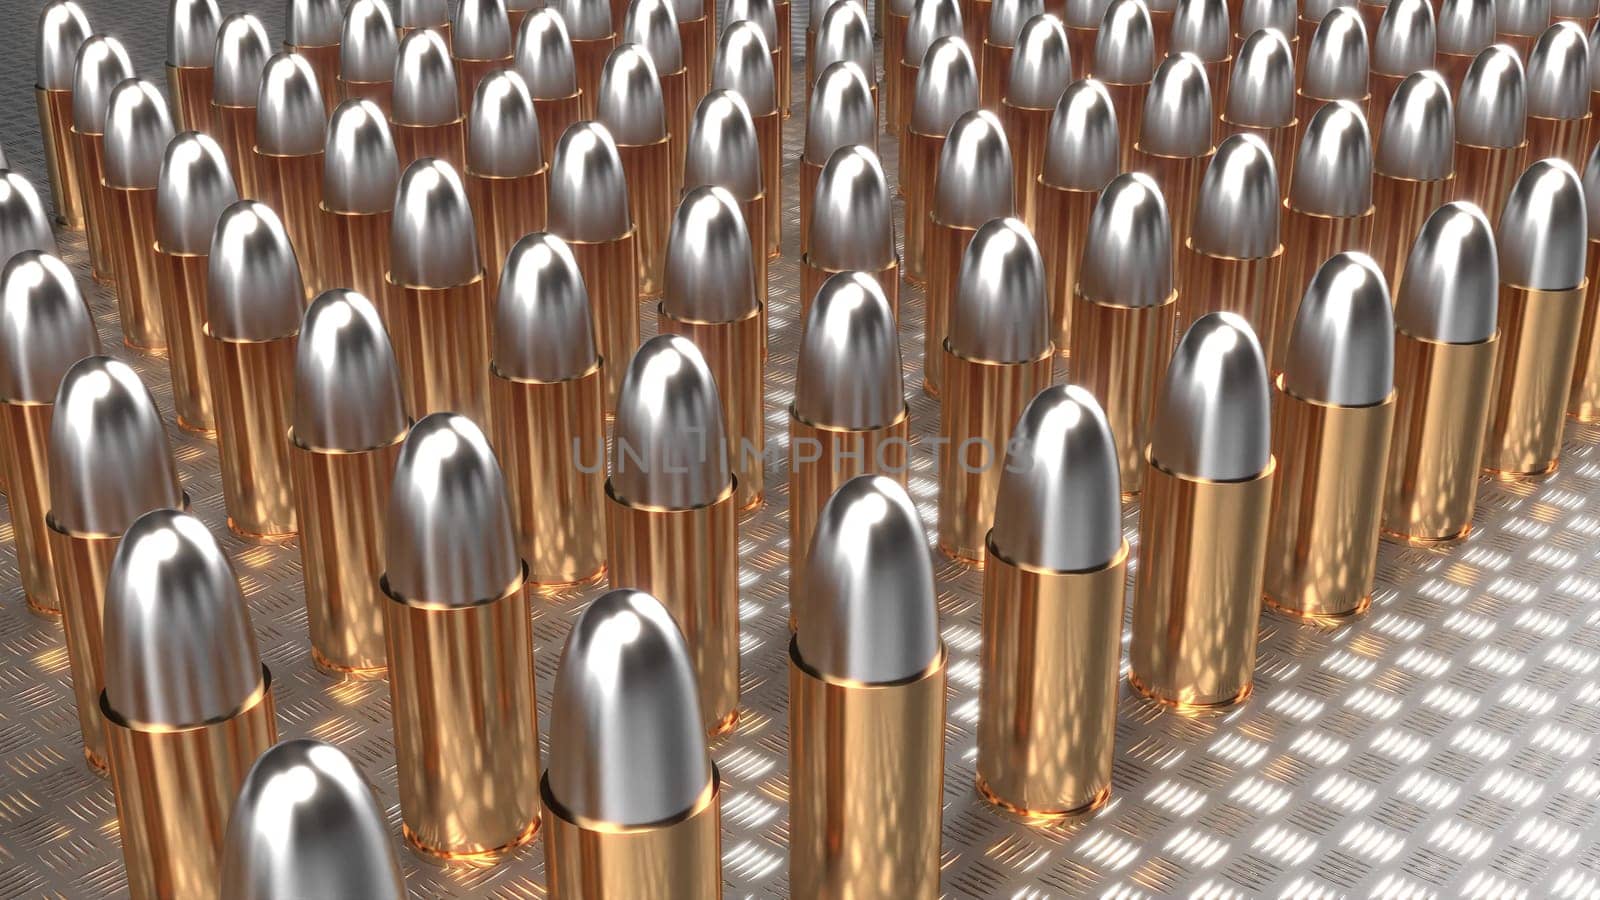 Bullets stand in a row on metal surface intro 3d render by Zozulinskyi